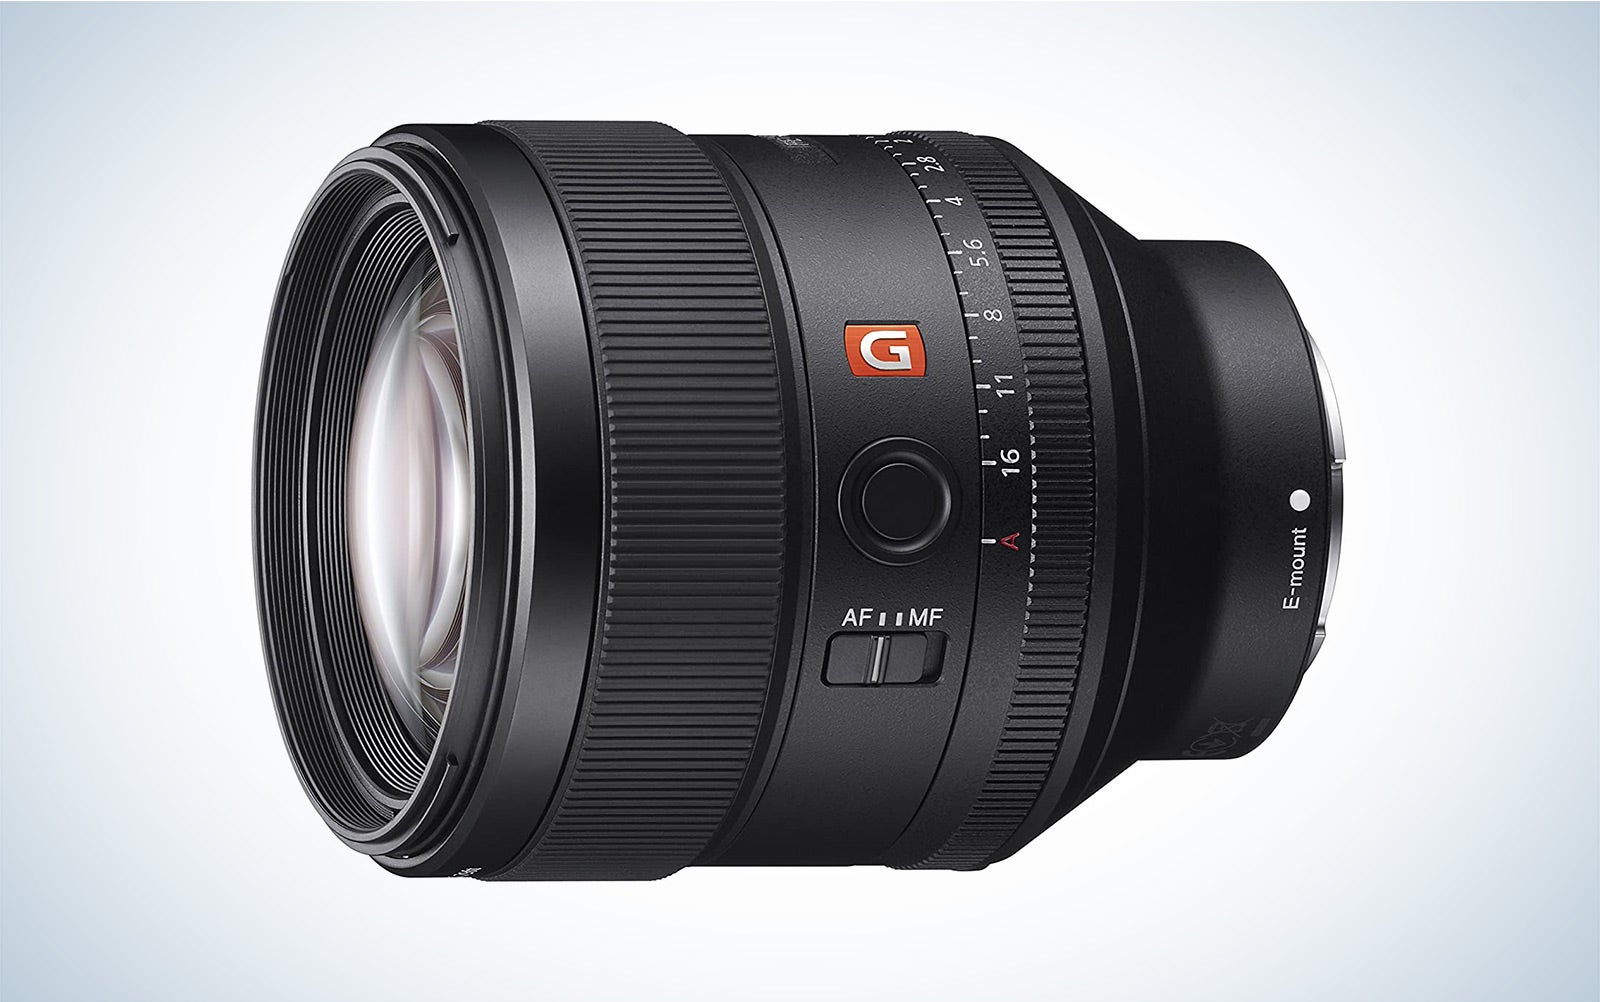 The Sony FE 85mm f/1.4 GM Lens is the best 85mm G Master lens.